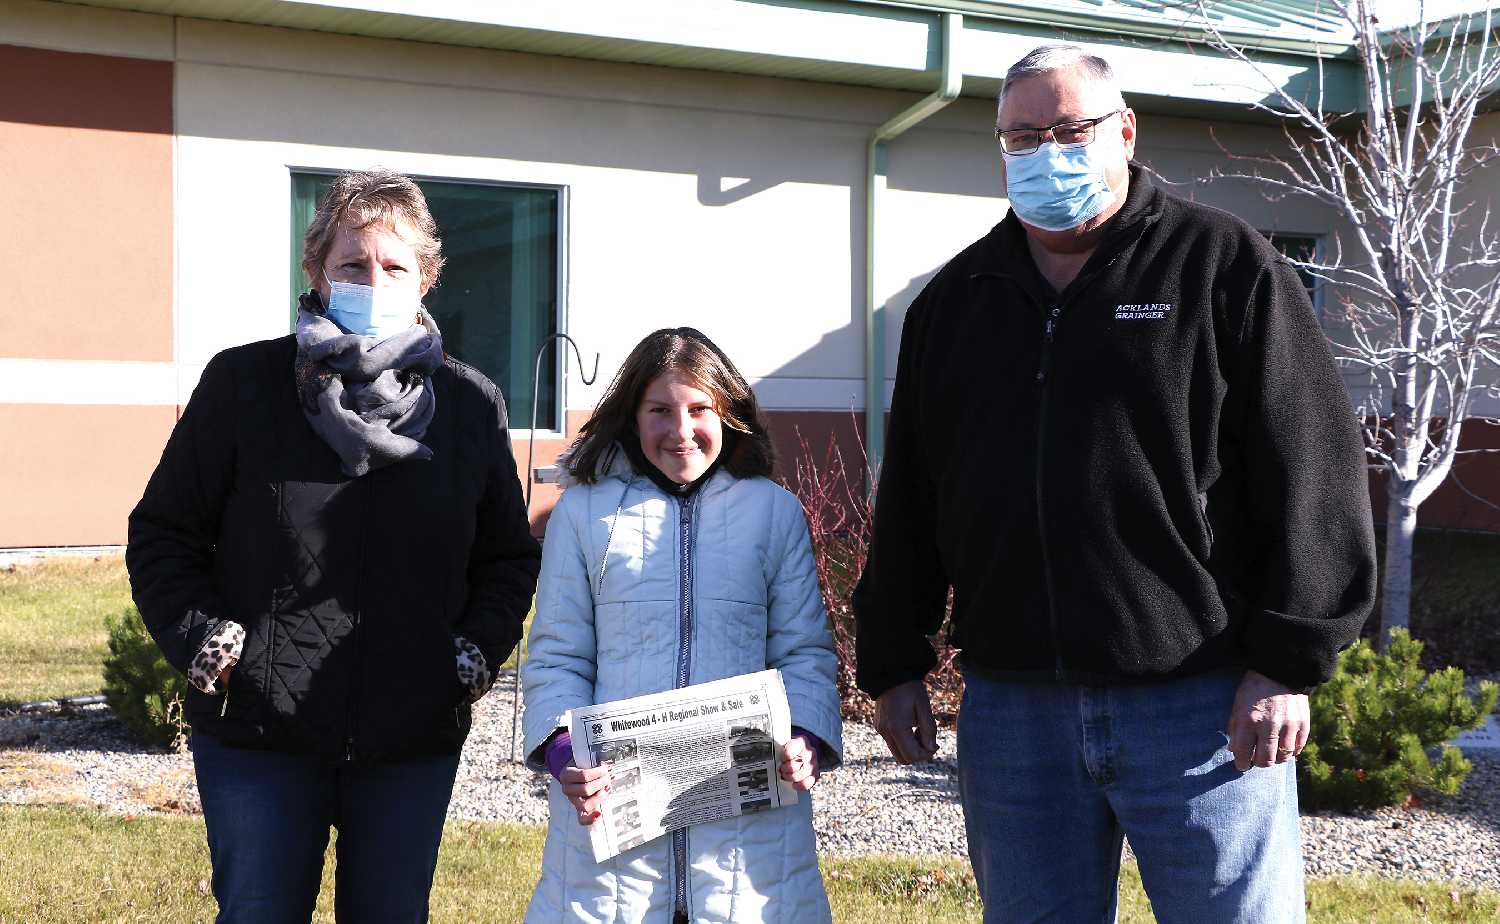 Brielle Johnson of Whitewood donated half the proceeds of the sale of her 4-H steer to the Moosomin and District Health Care Foundation From left are Wendy Lynd  of the Moosomin and District Health Care Foundation, Brielle Johnson, and Moosomin Mayor Larry Tomlinson.